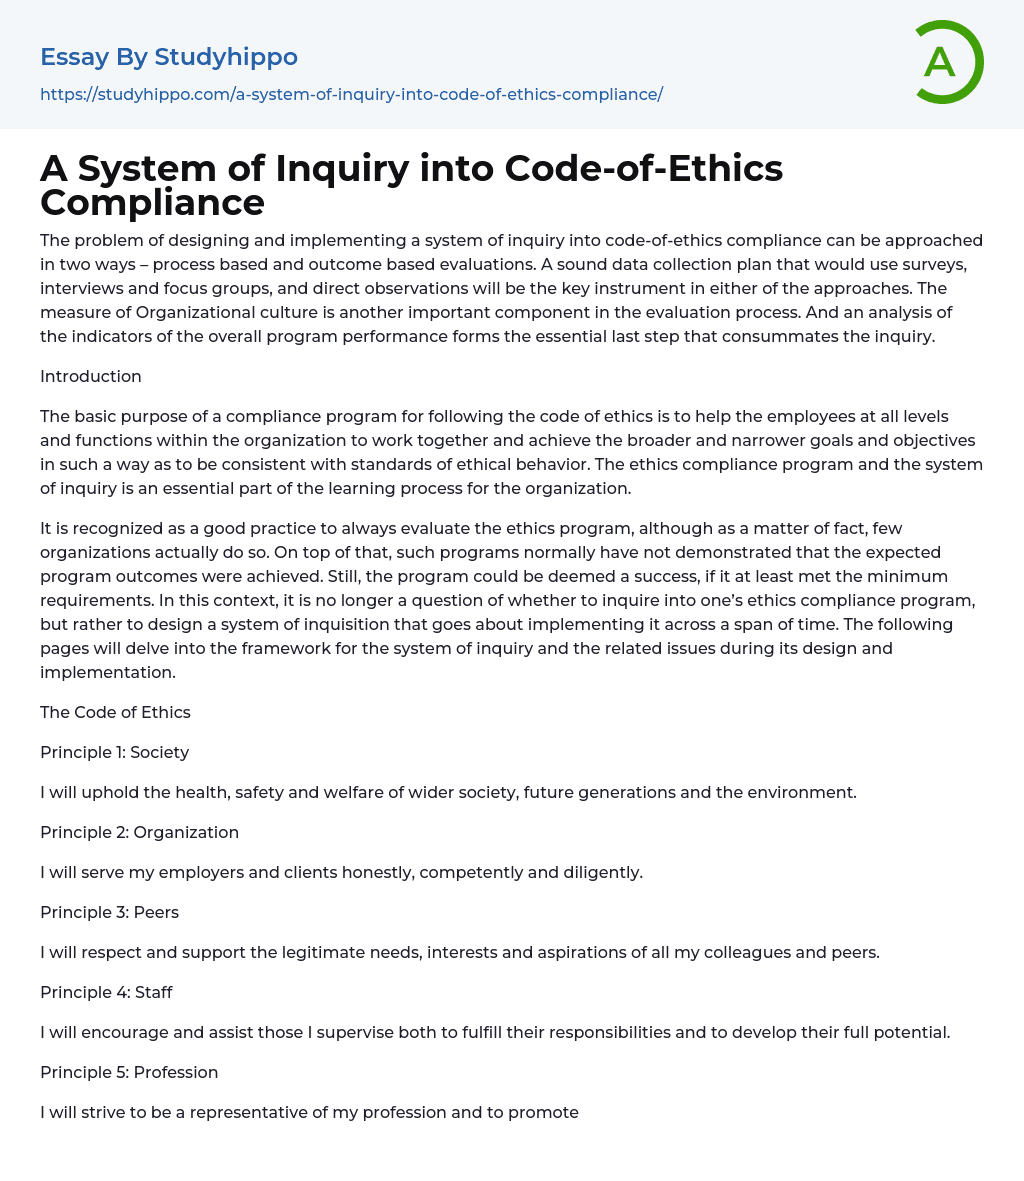 A System of Inquiry into Code-of-Ethics Compliance Essay Example